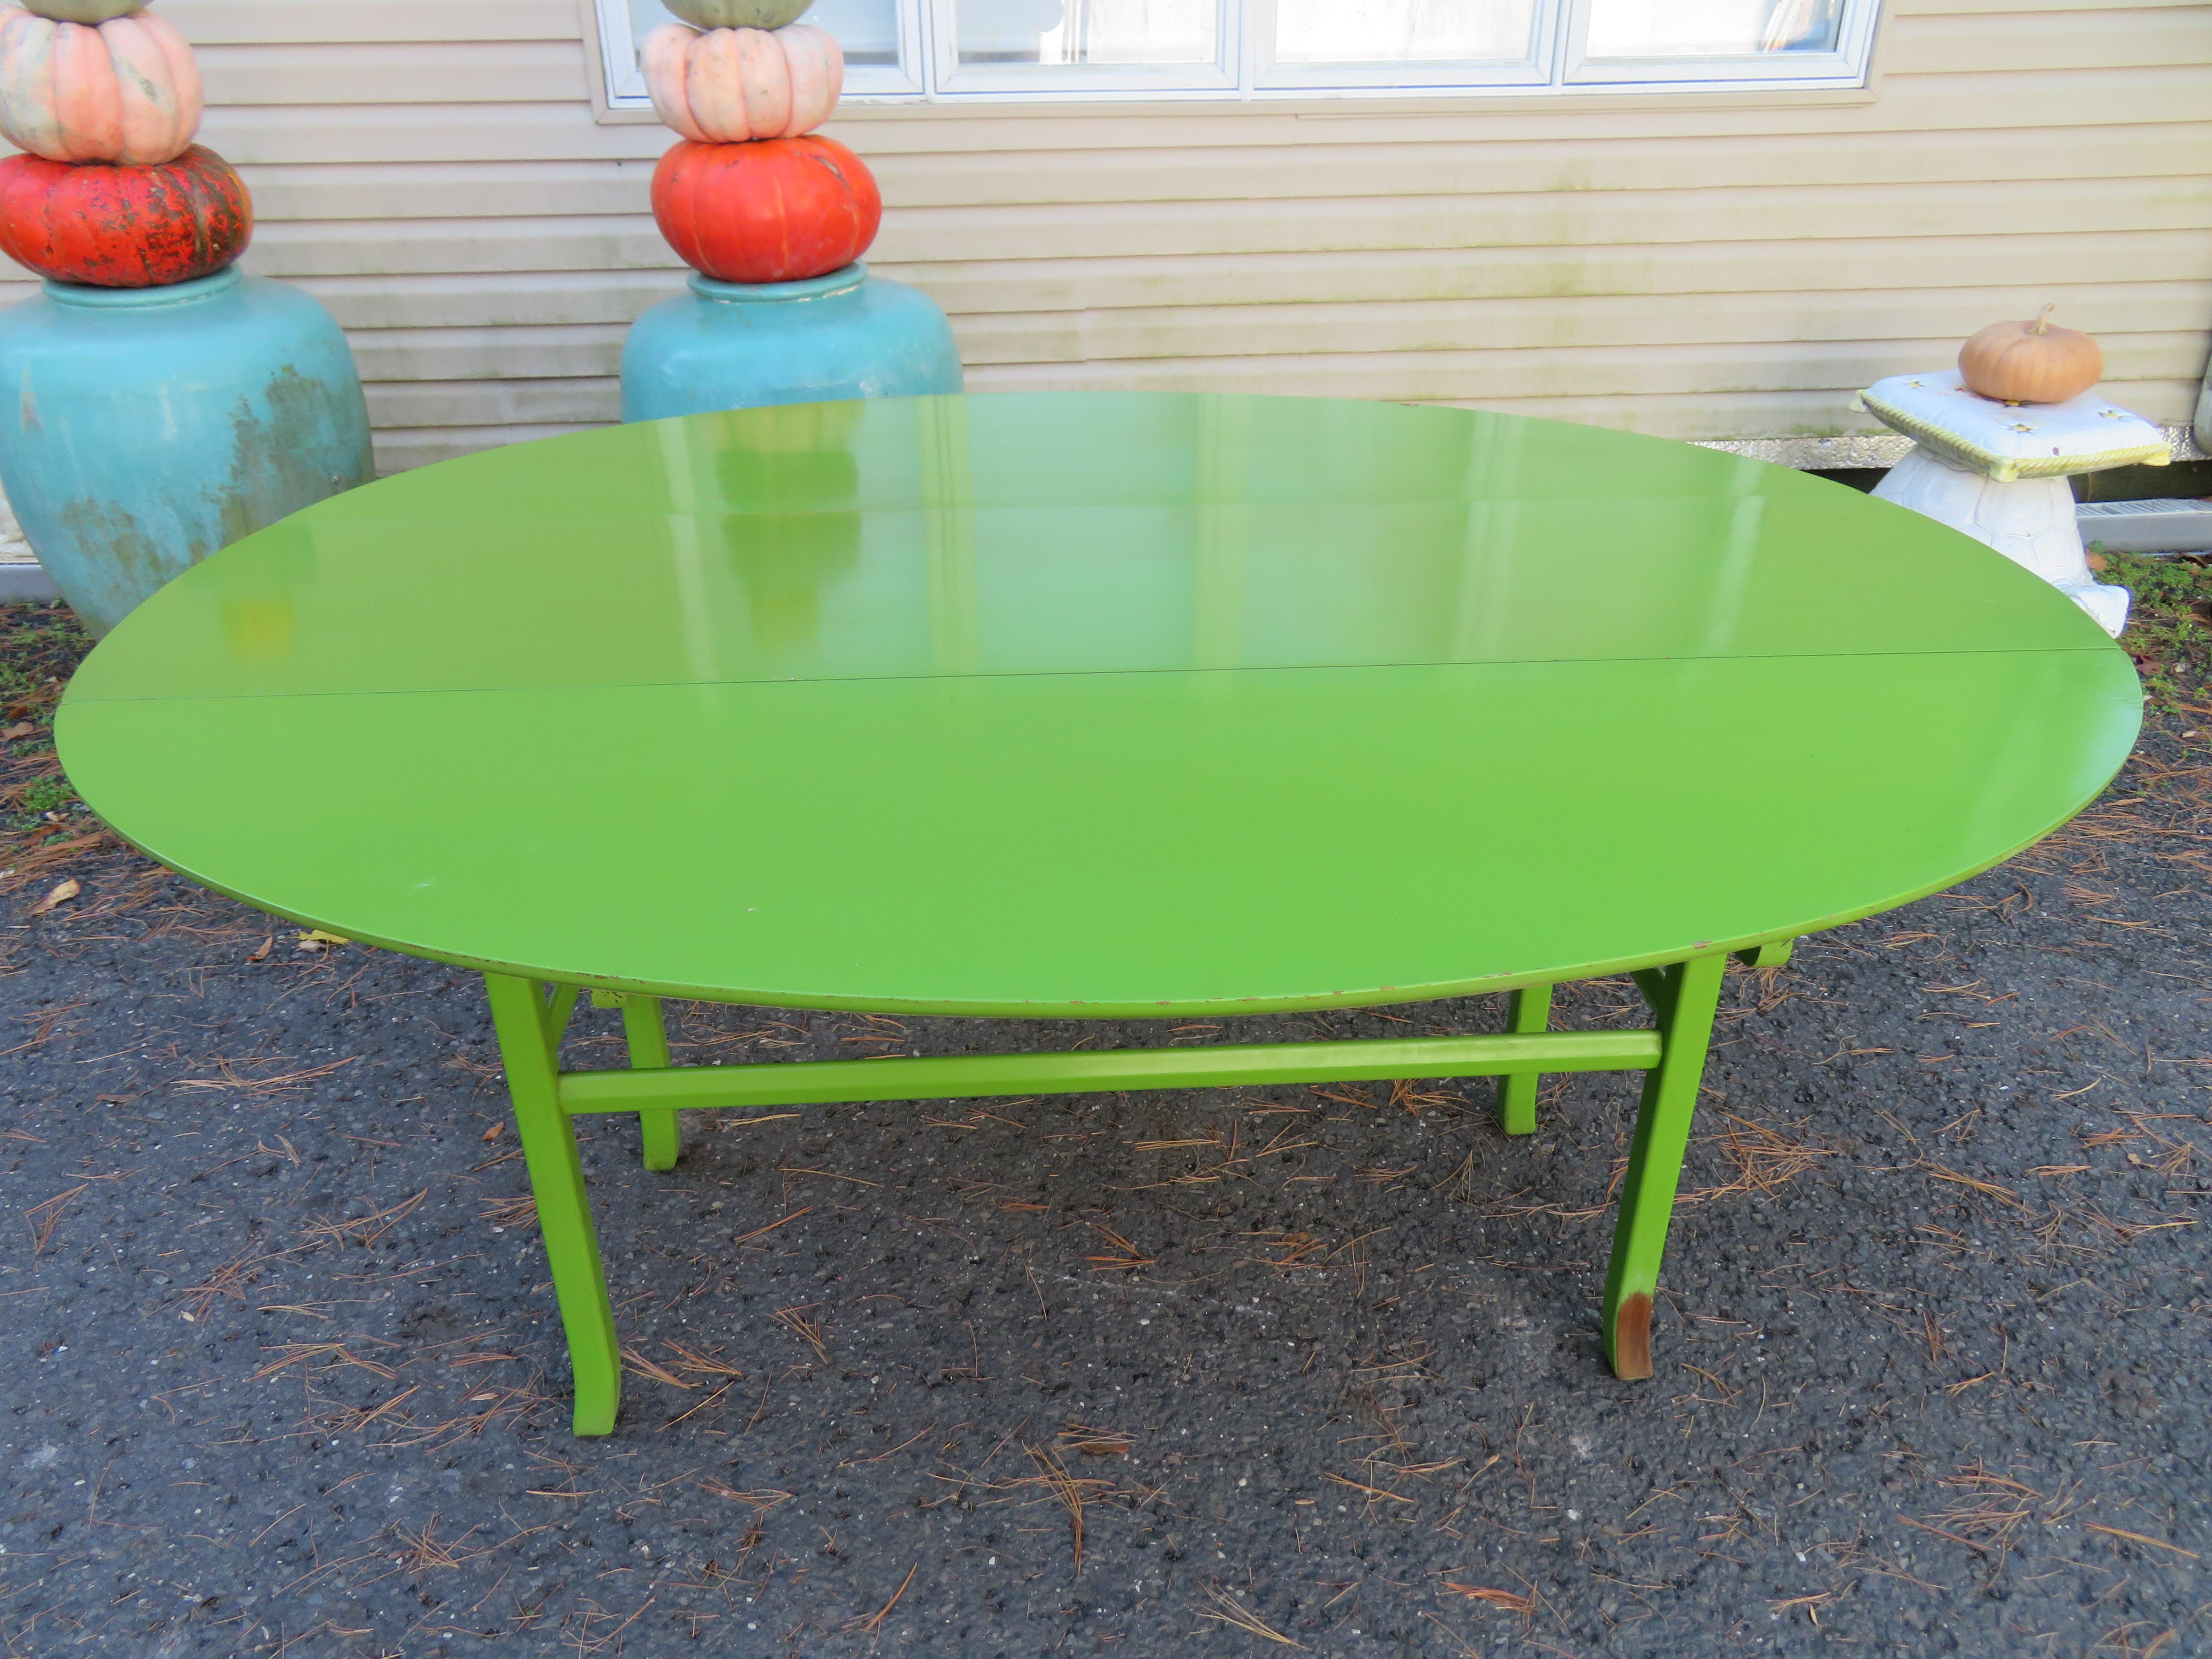 Fantastic pop-colored drop leaf console table from the mid-century. We love everything about this fun and useful table from the lime green color to the fact that this table can serve 2 functions. It can sit behind your sofa as a console or sofa